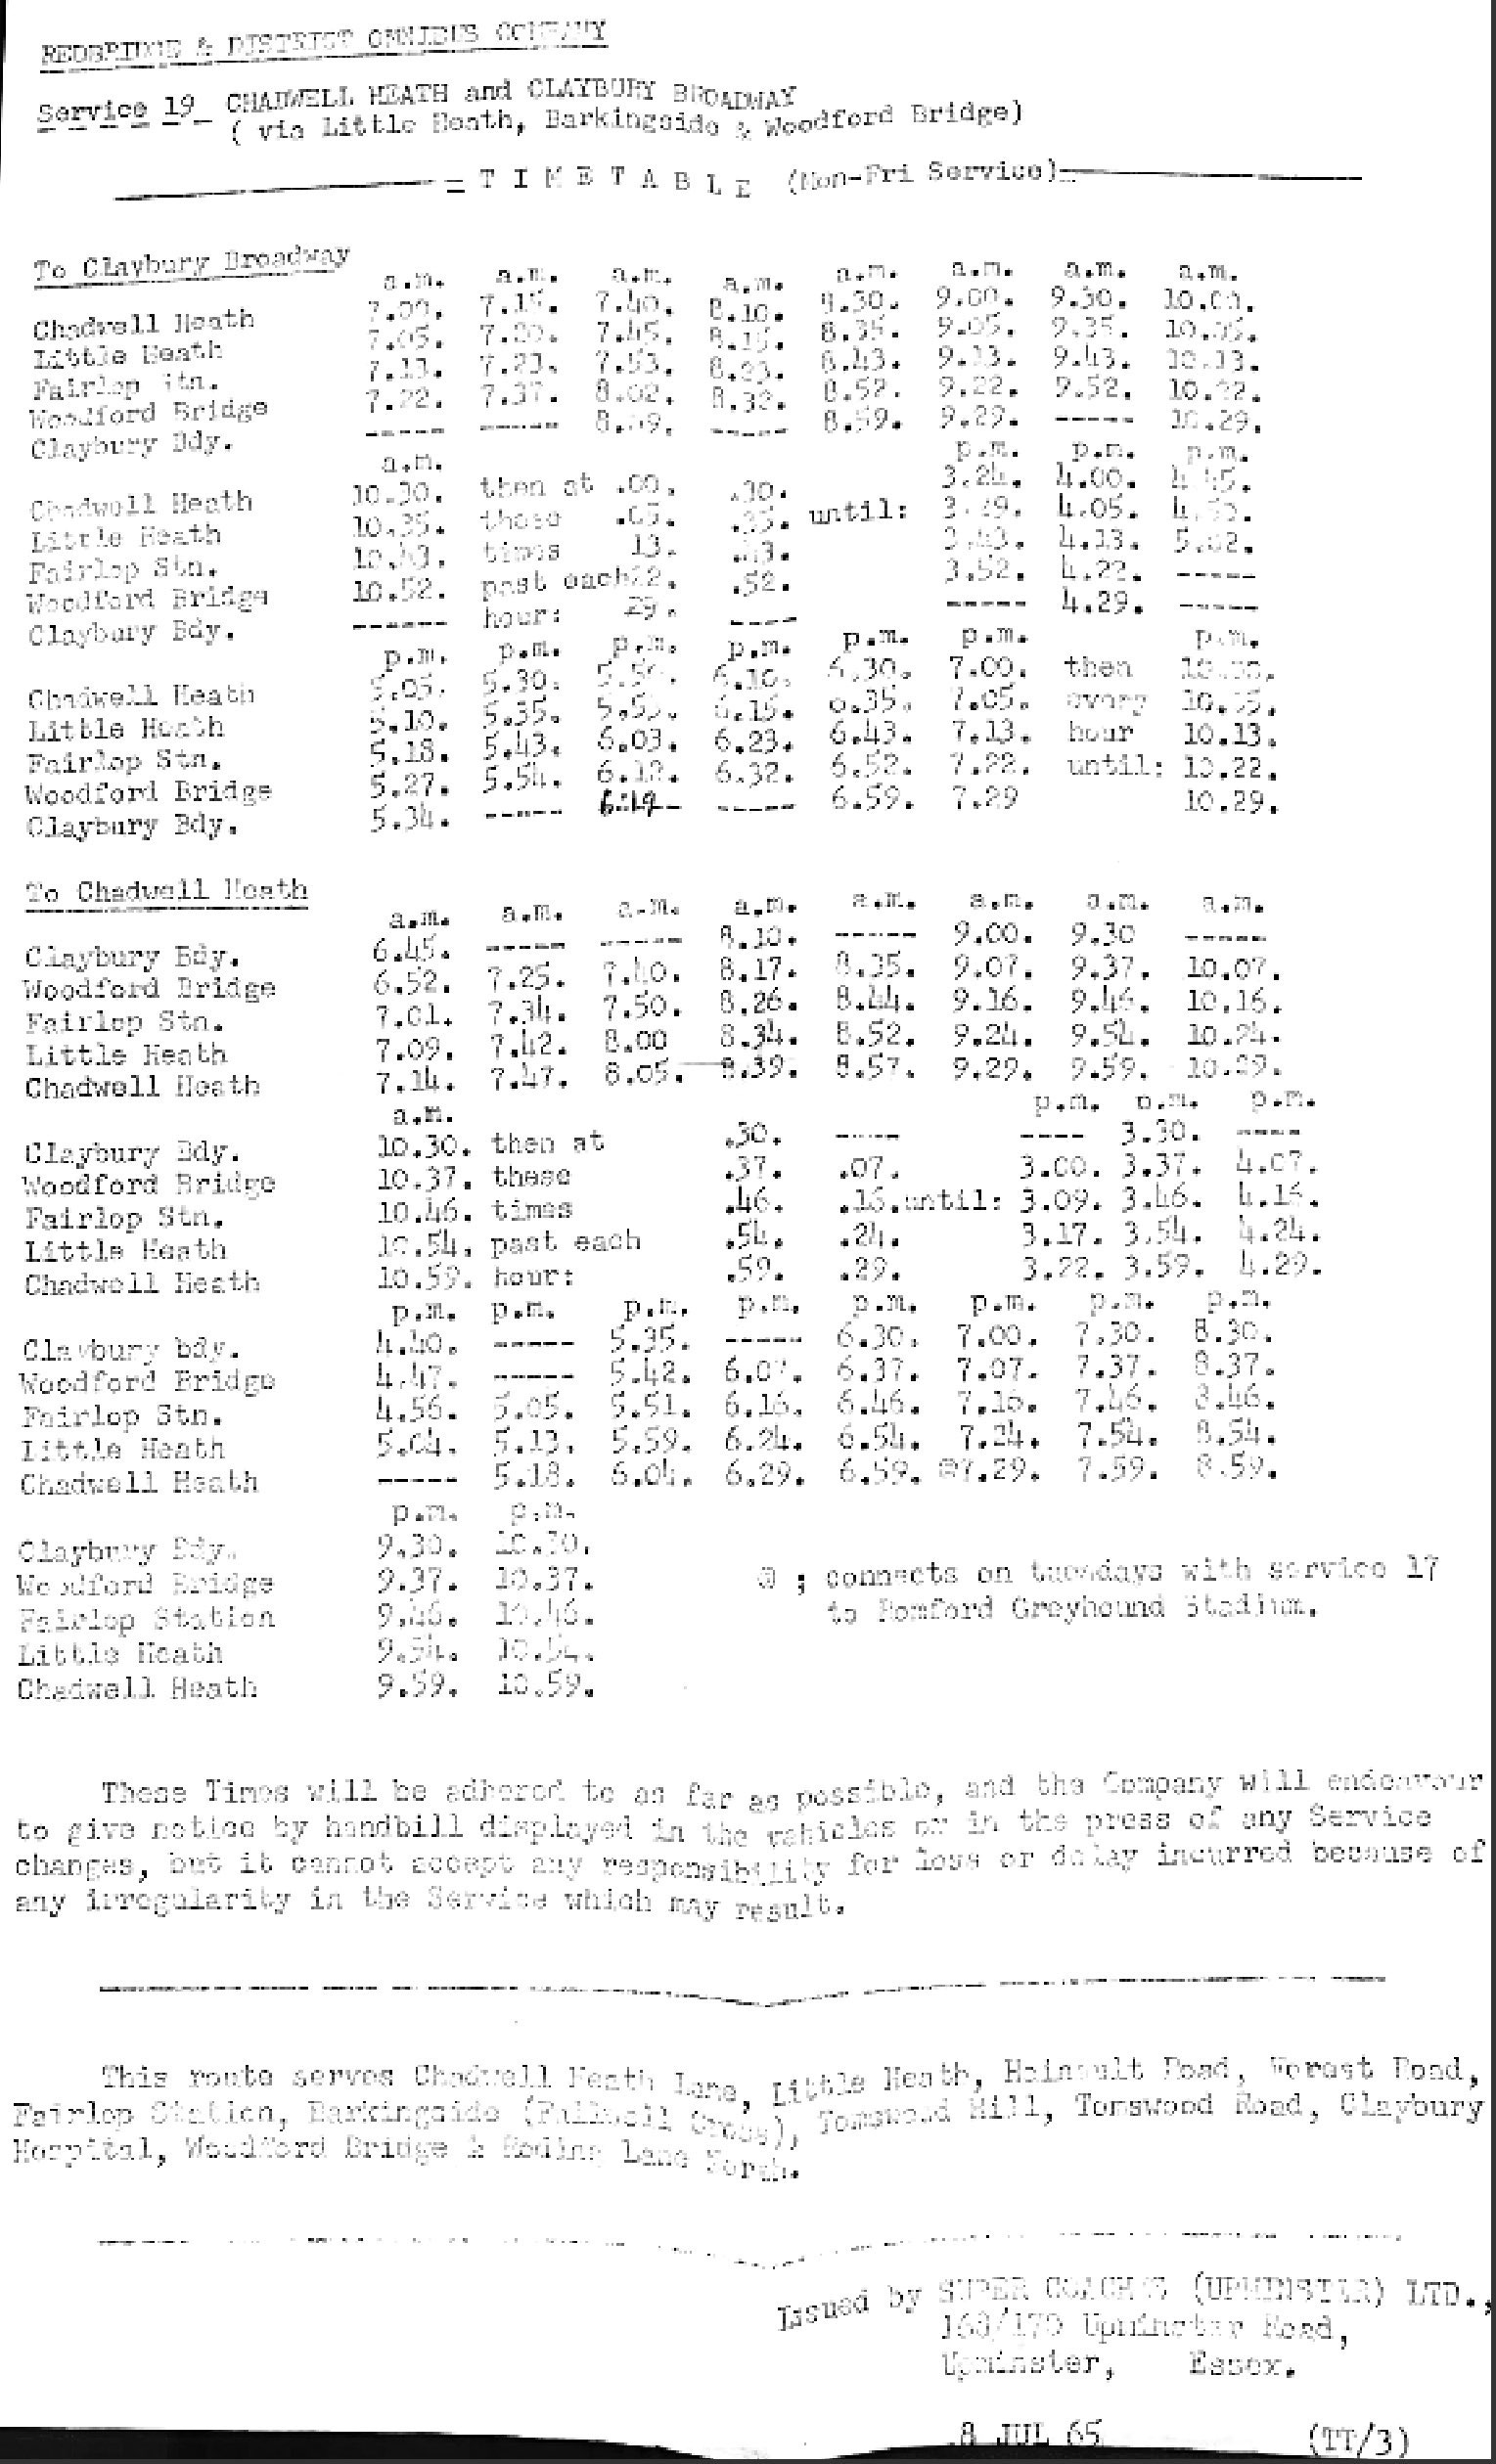 Monday to Friday timetable July 1965